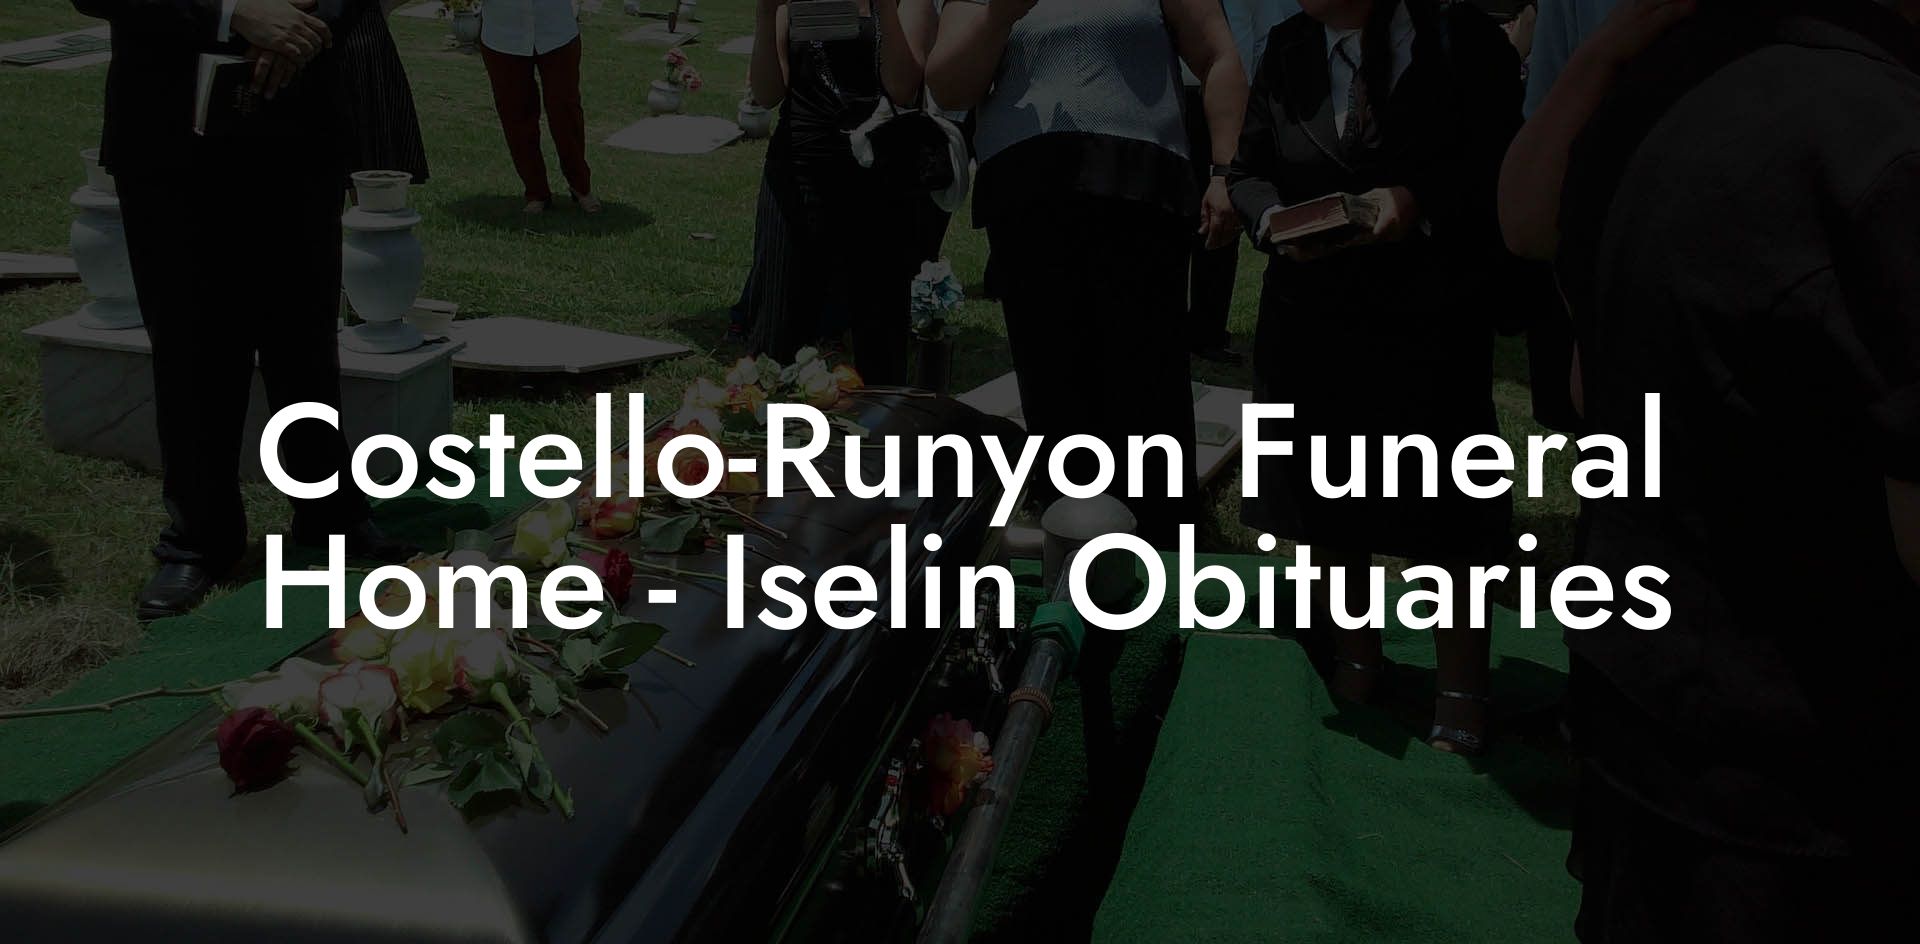 Costello-Runyon Funeral Home - Iselin Obituaries